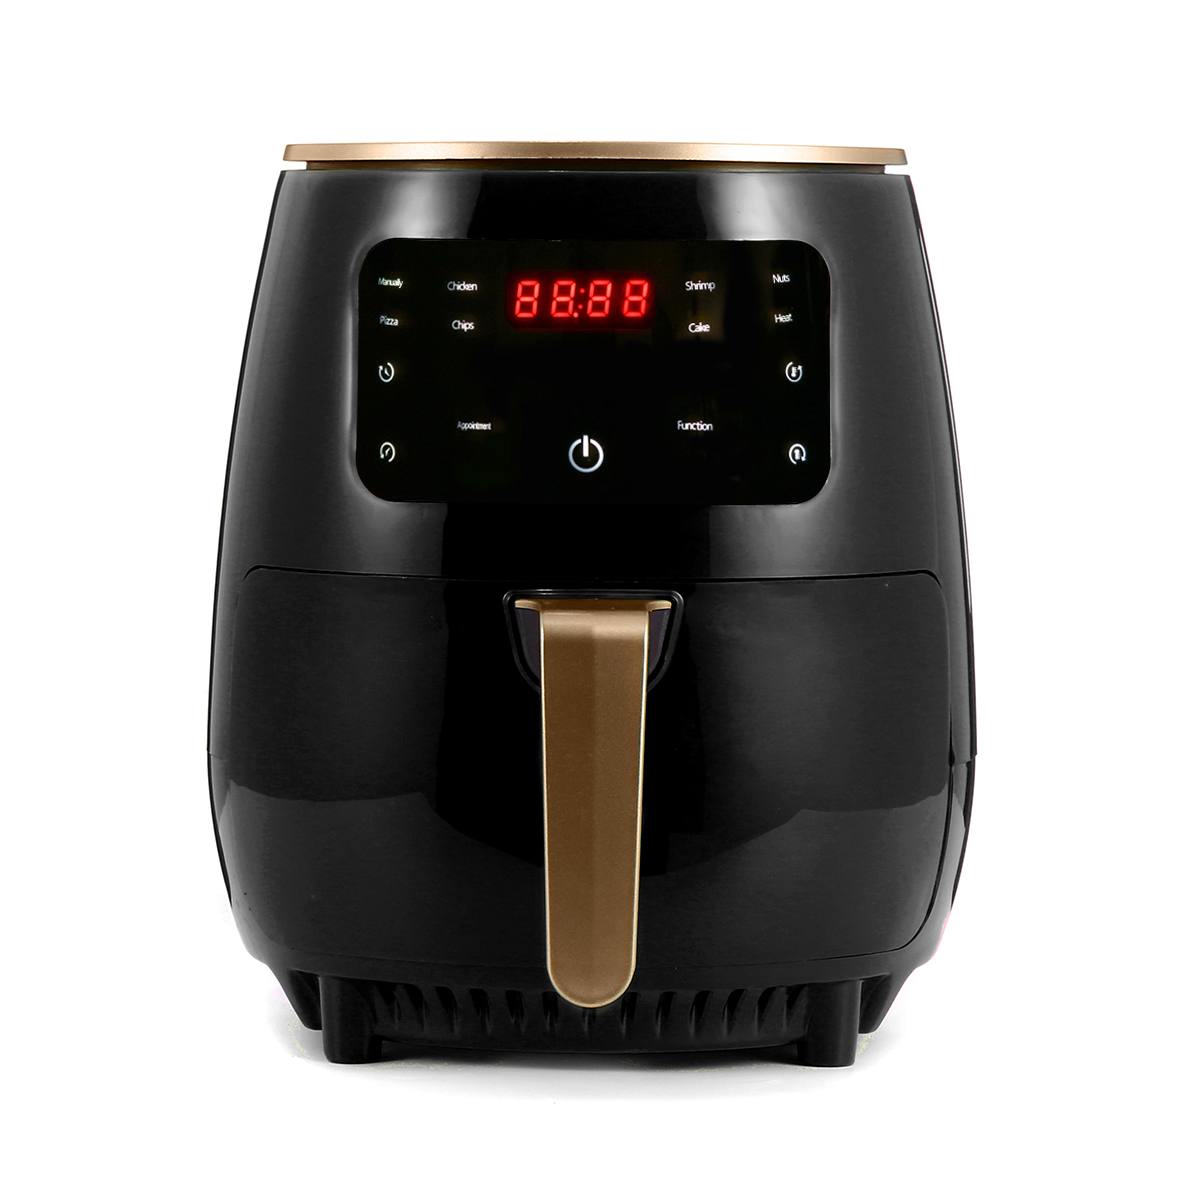 1400W 4.5L Multifunction Air Fryer Chicken Oil Free Air Fryer Health Fryer Pizza Cooker Smart Touch LCD Electric Deep Airfryer